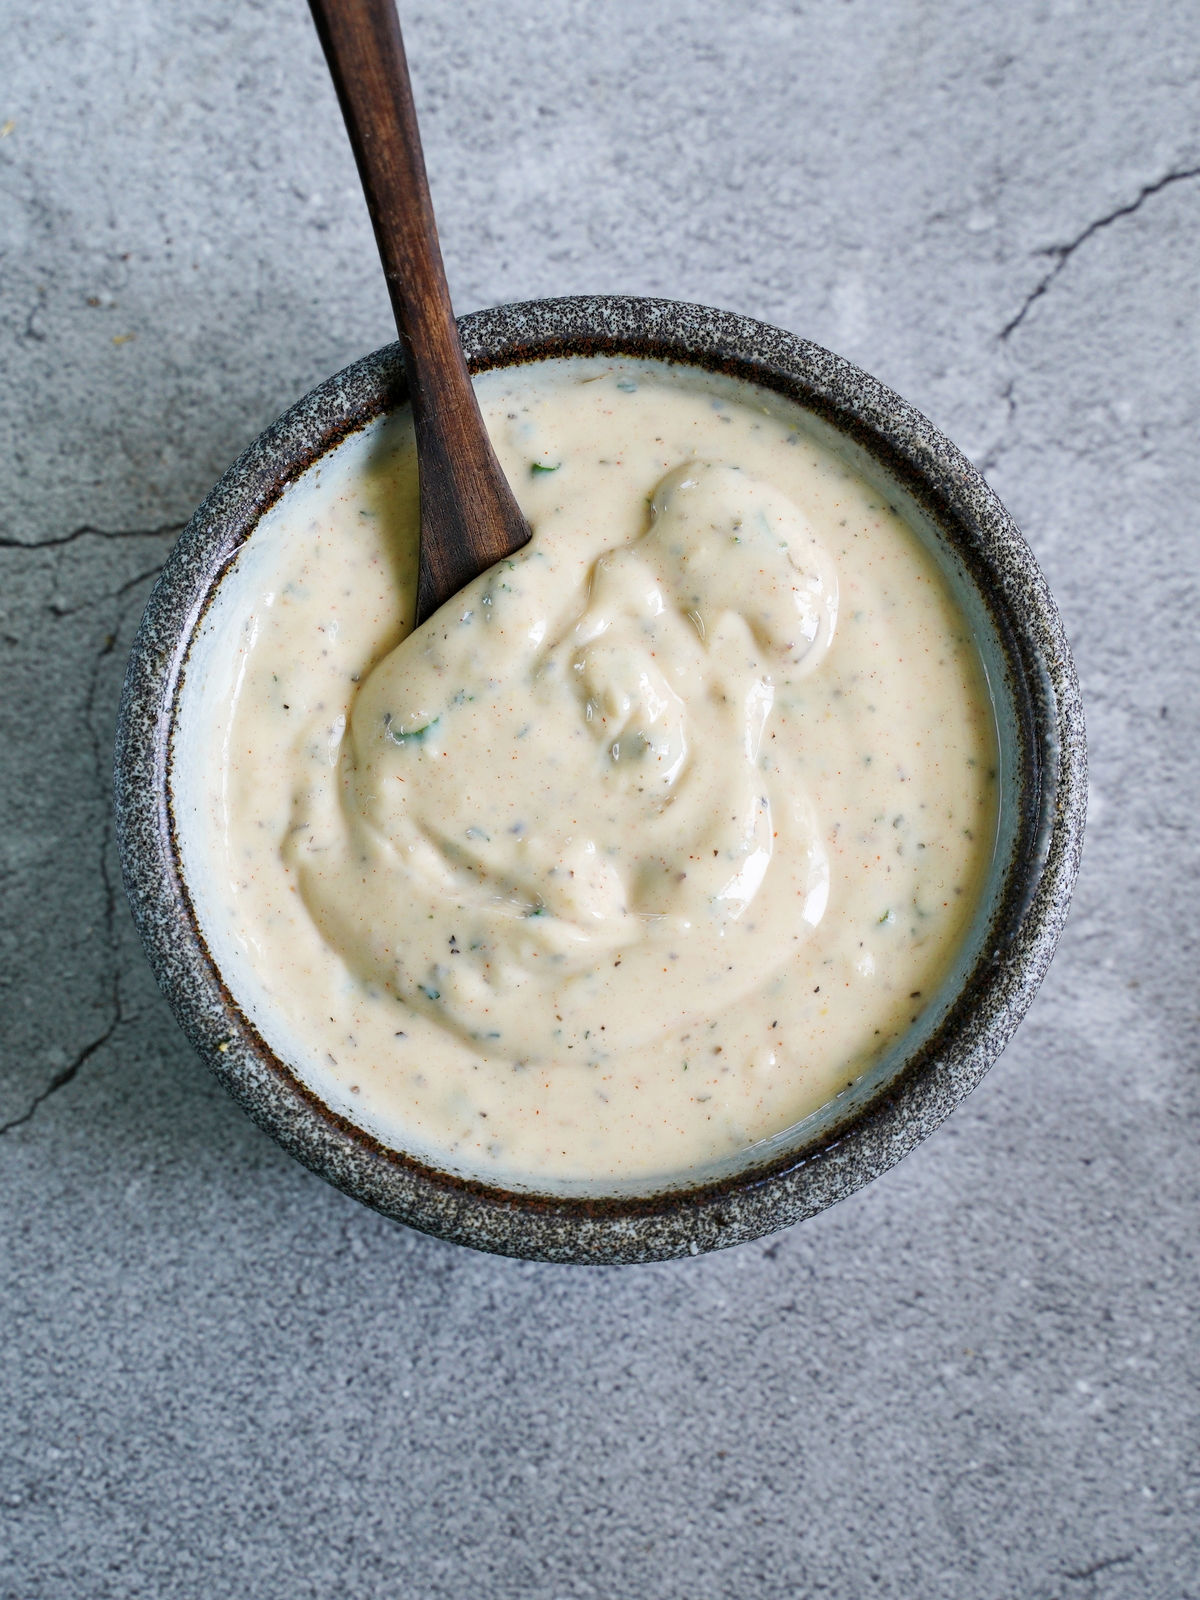 creamy salad dip in bowl with whisk